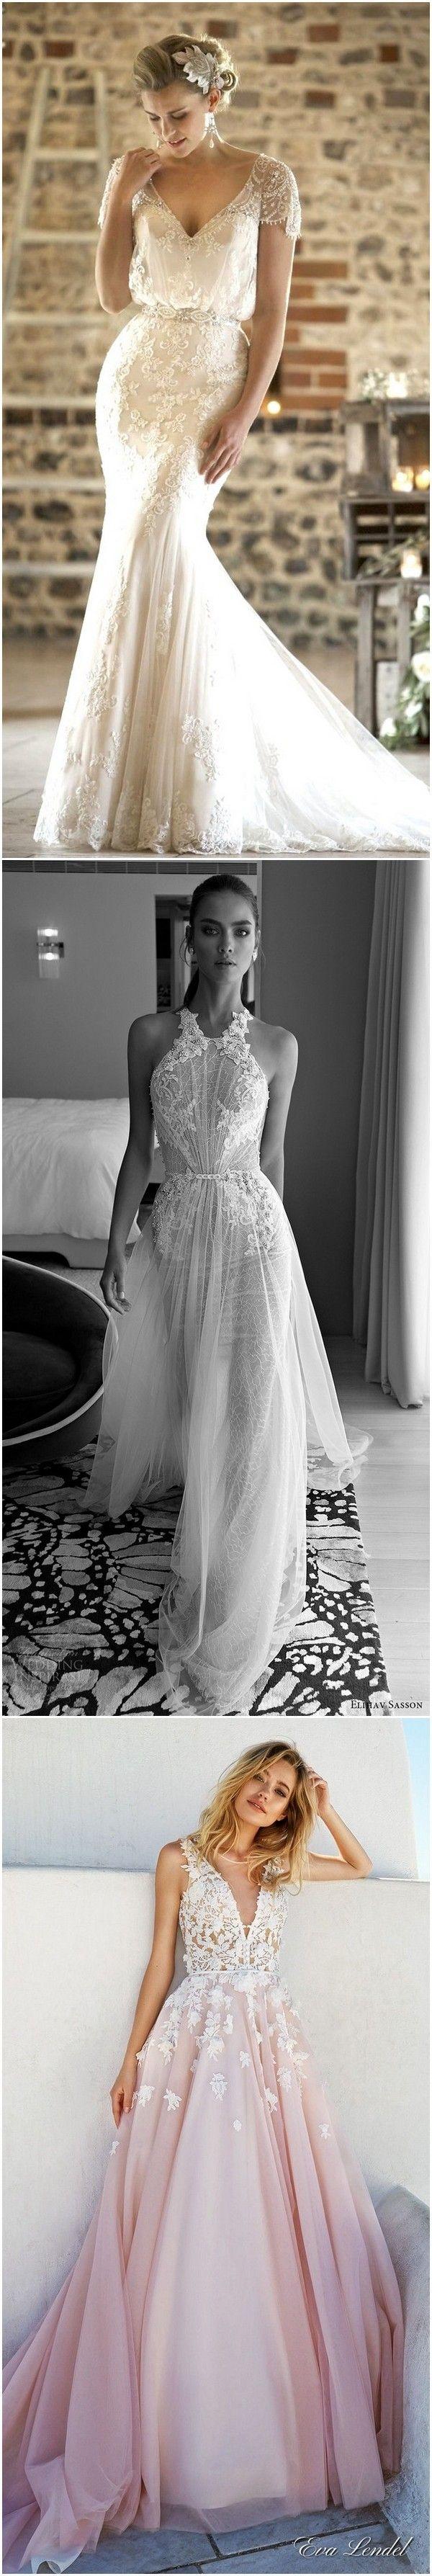 Mariage - Top 20 Vintage Wedding Dresses For 2017 Trends - Page 2 Of 4